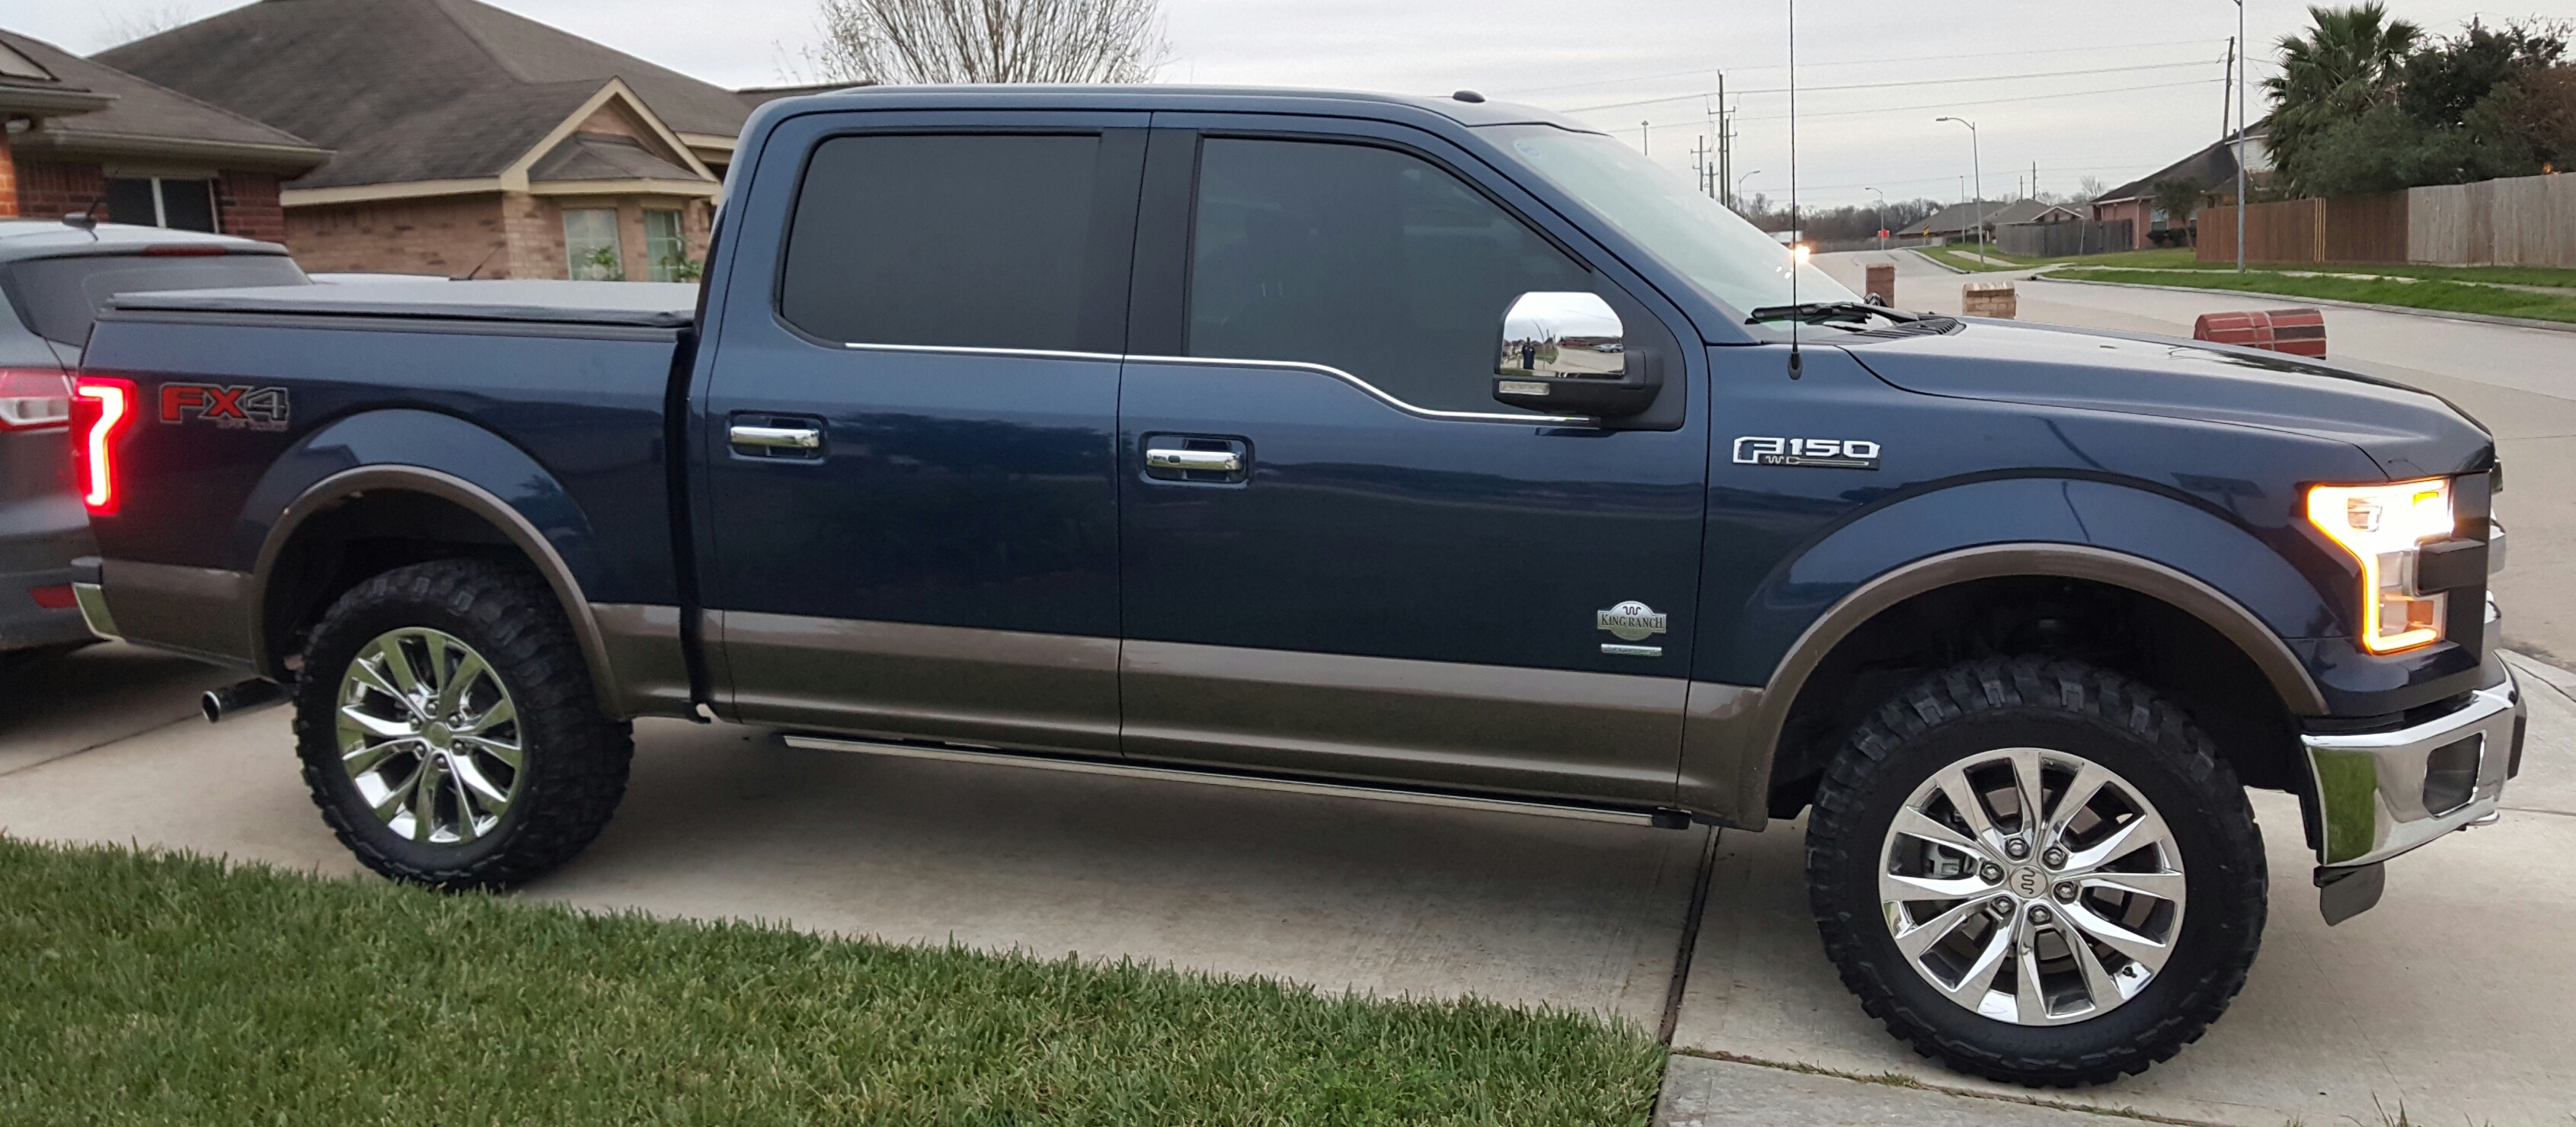 Blue Jeans Metallic PIC THREAD Page 14 Ford F150 Forum.